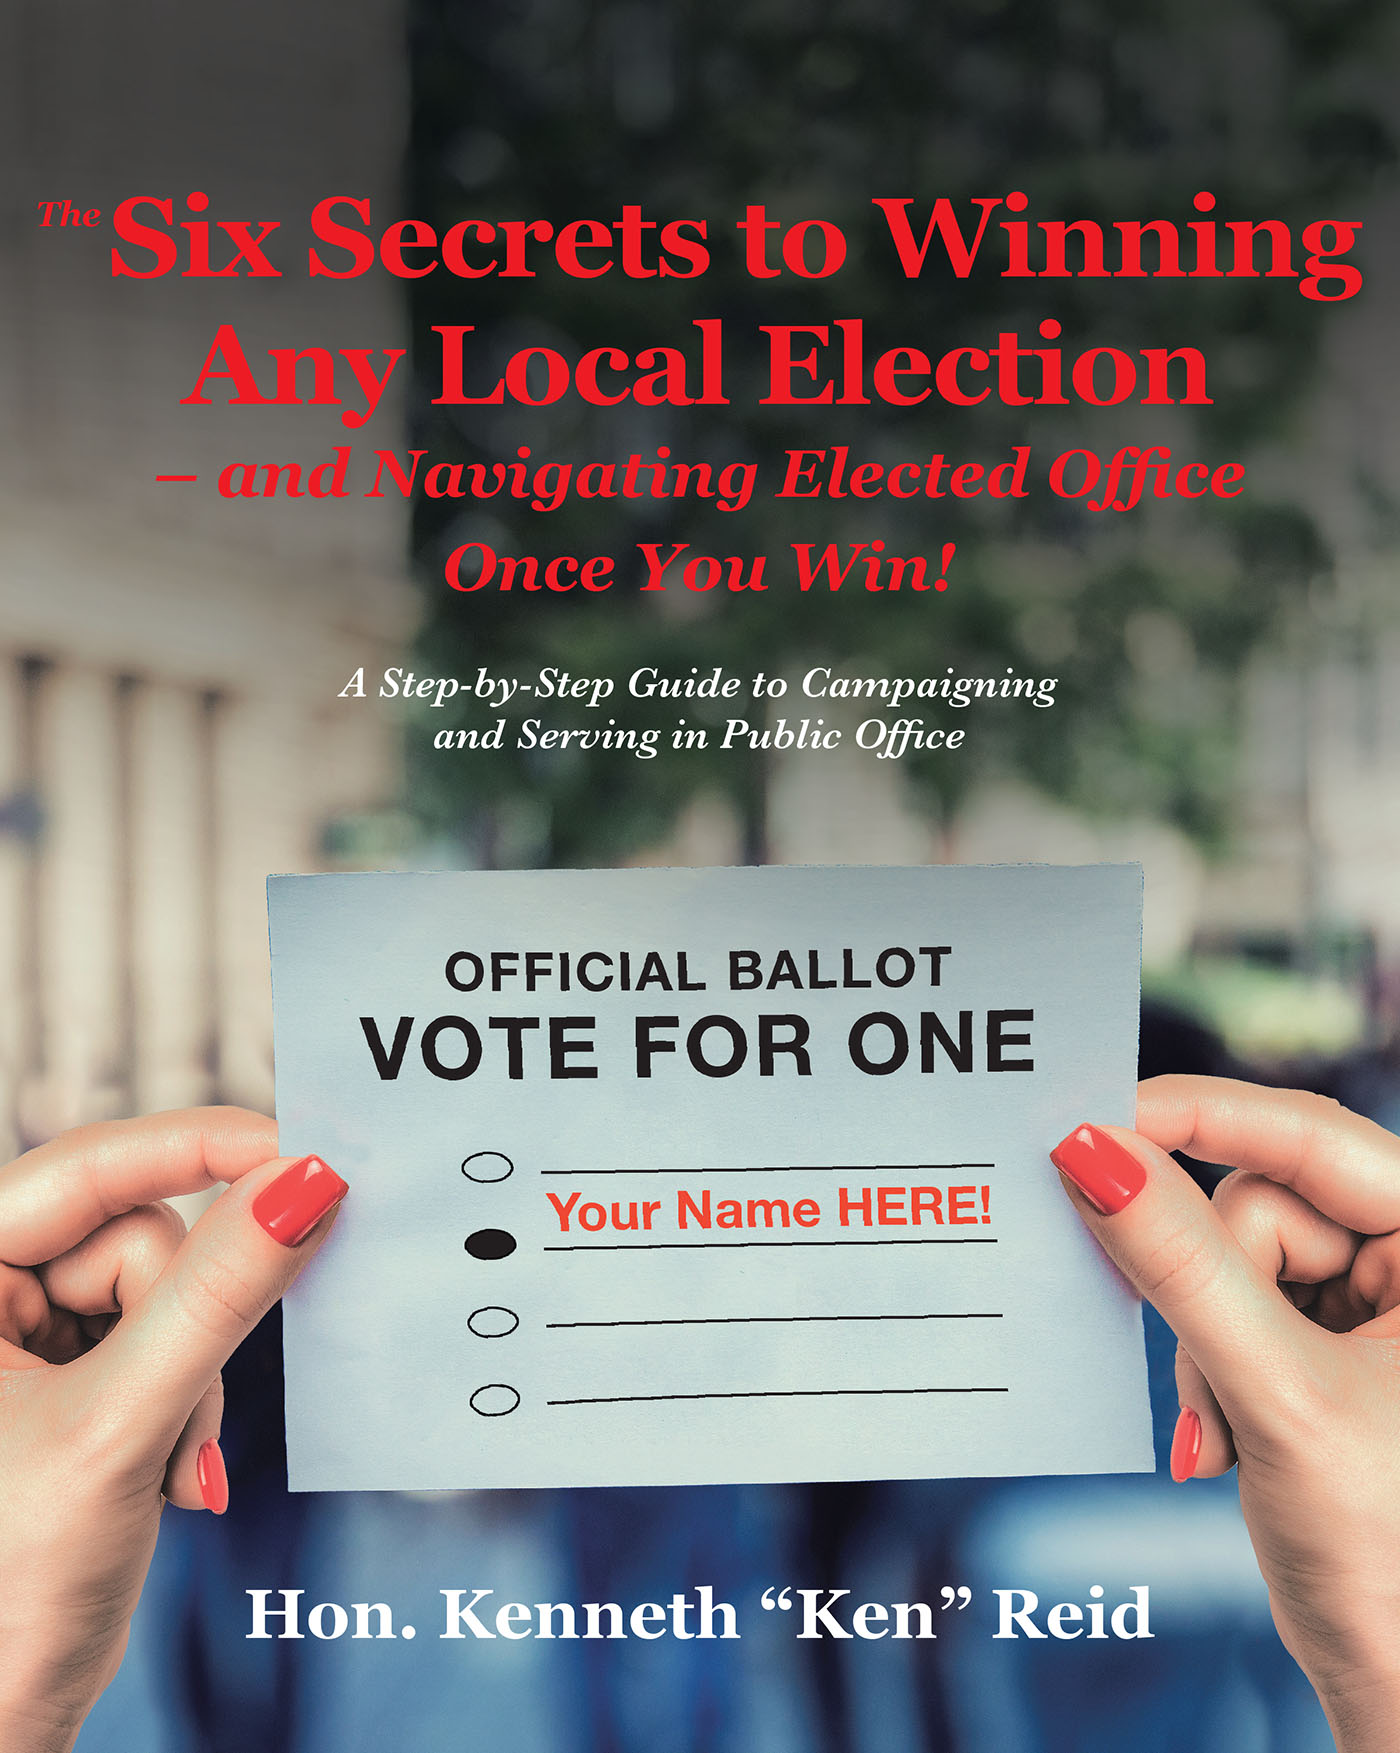 The 6 Secrets to Winning Any Local Election - and Navigating Elected Office Once You Win! Cover Image